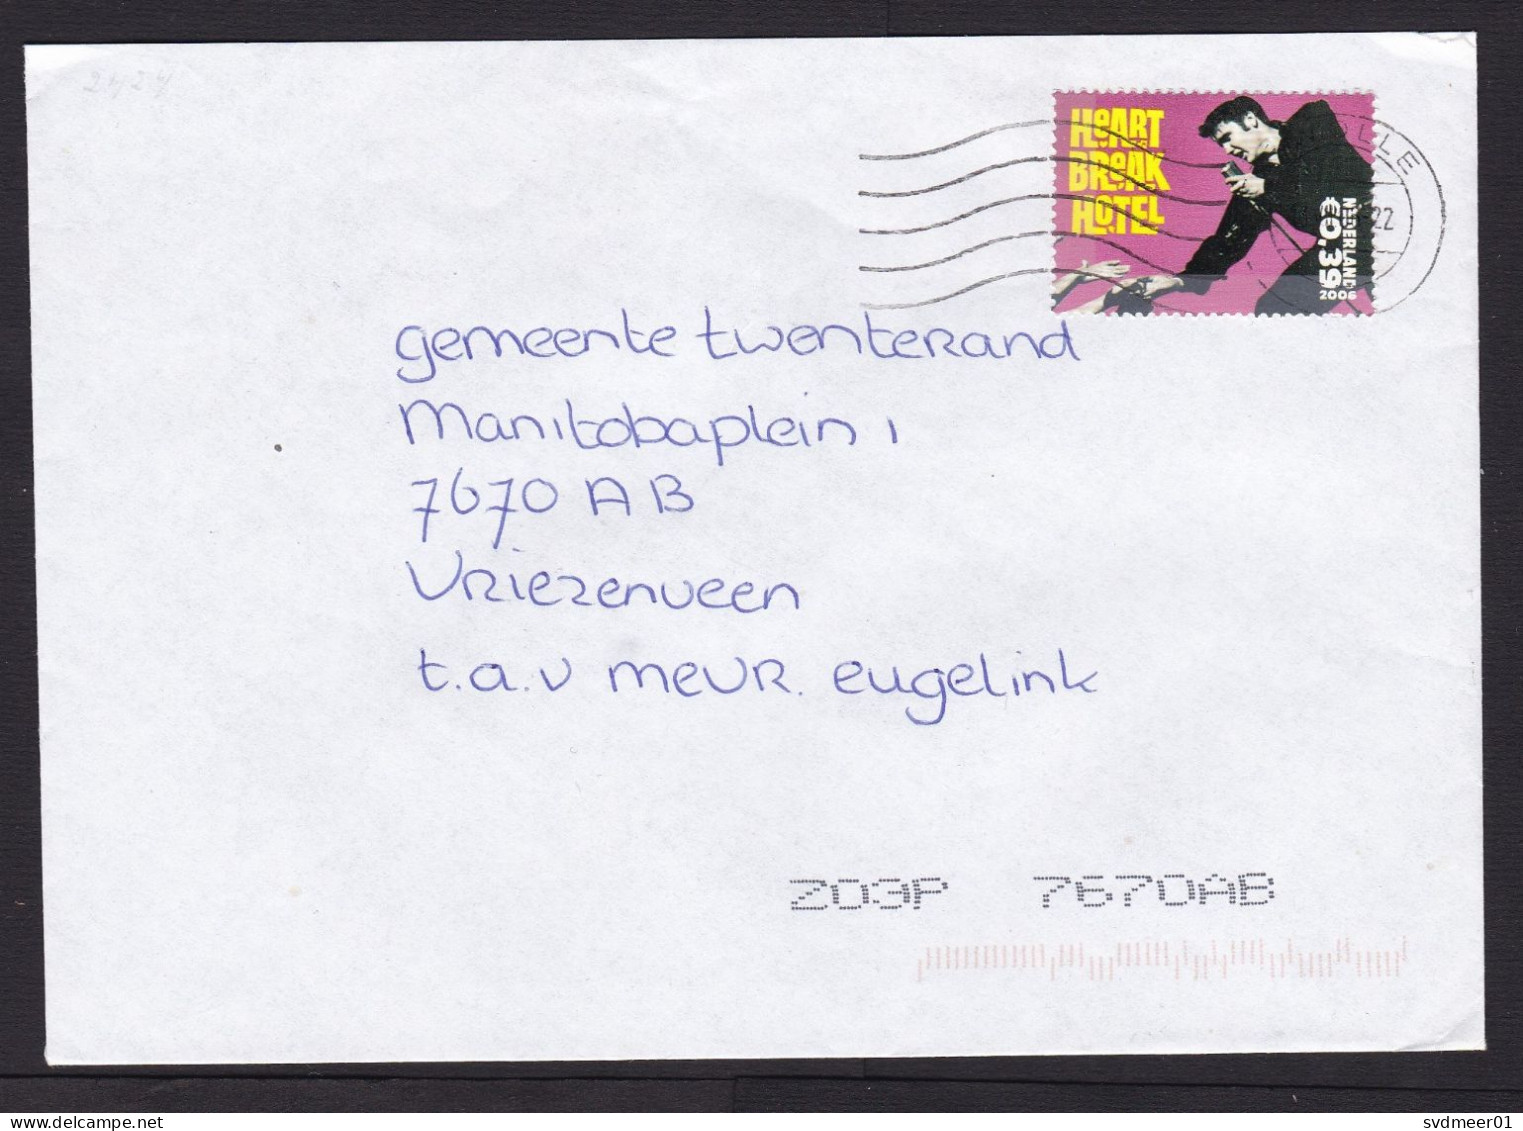 Netherlands: Cover, 2006, 1 Stamp, Elvis Presley, Heartbreak Hotel, Music, Song, Singer (traces Of Use) - Covers & Documents